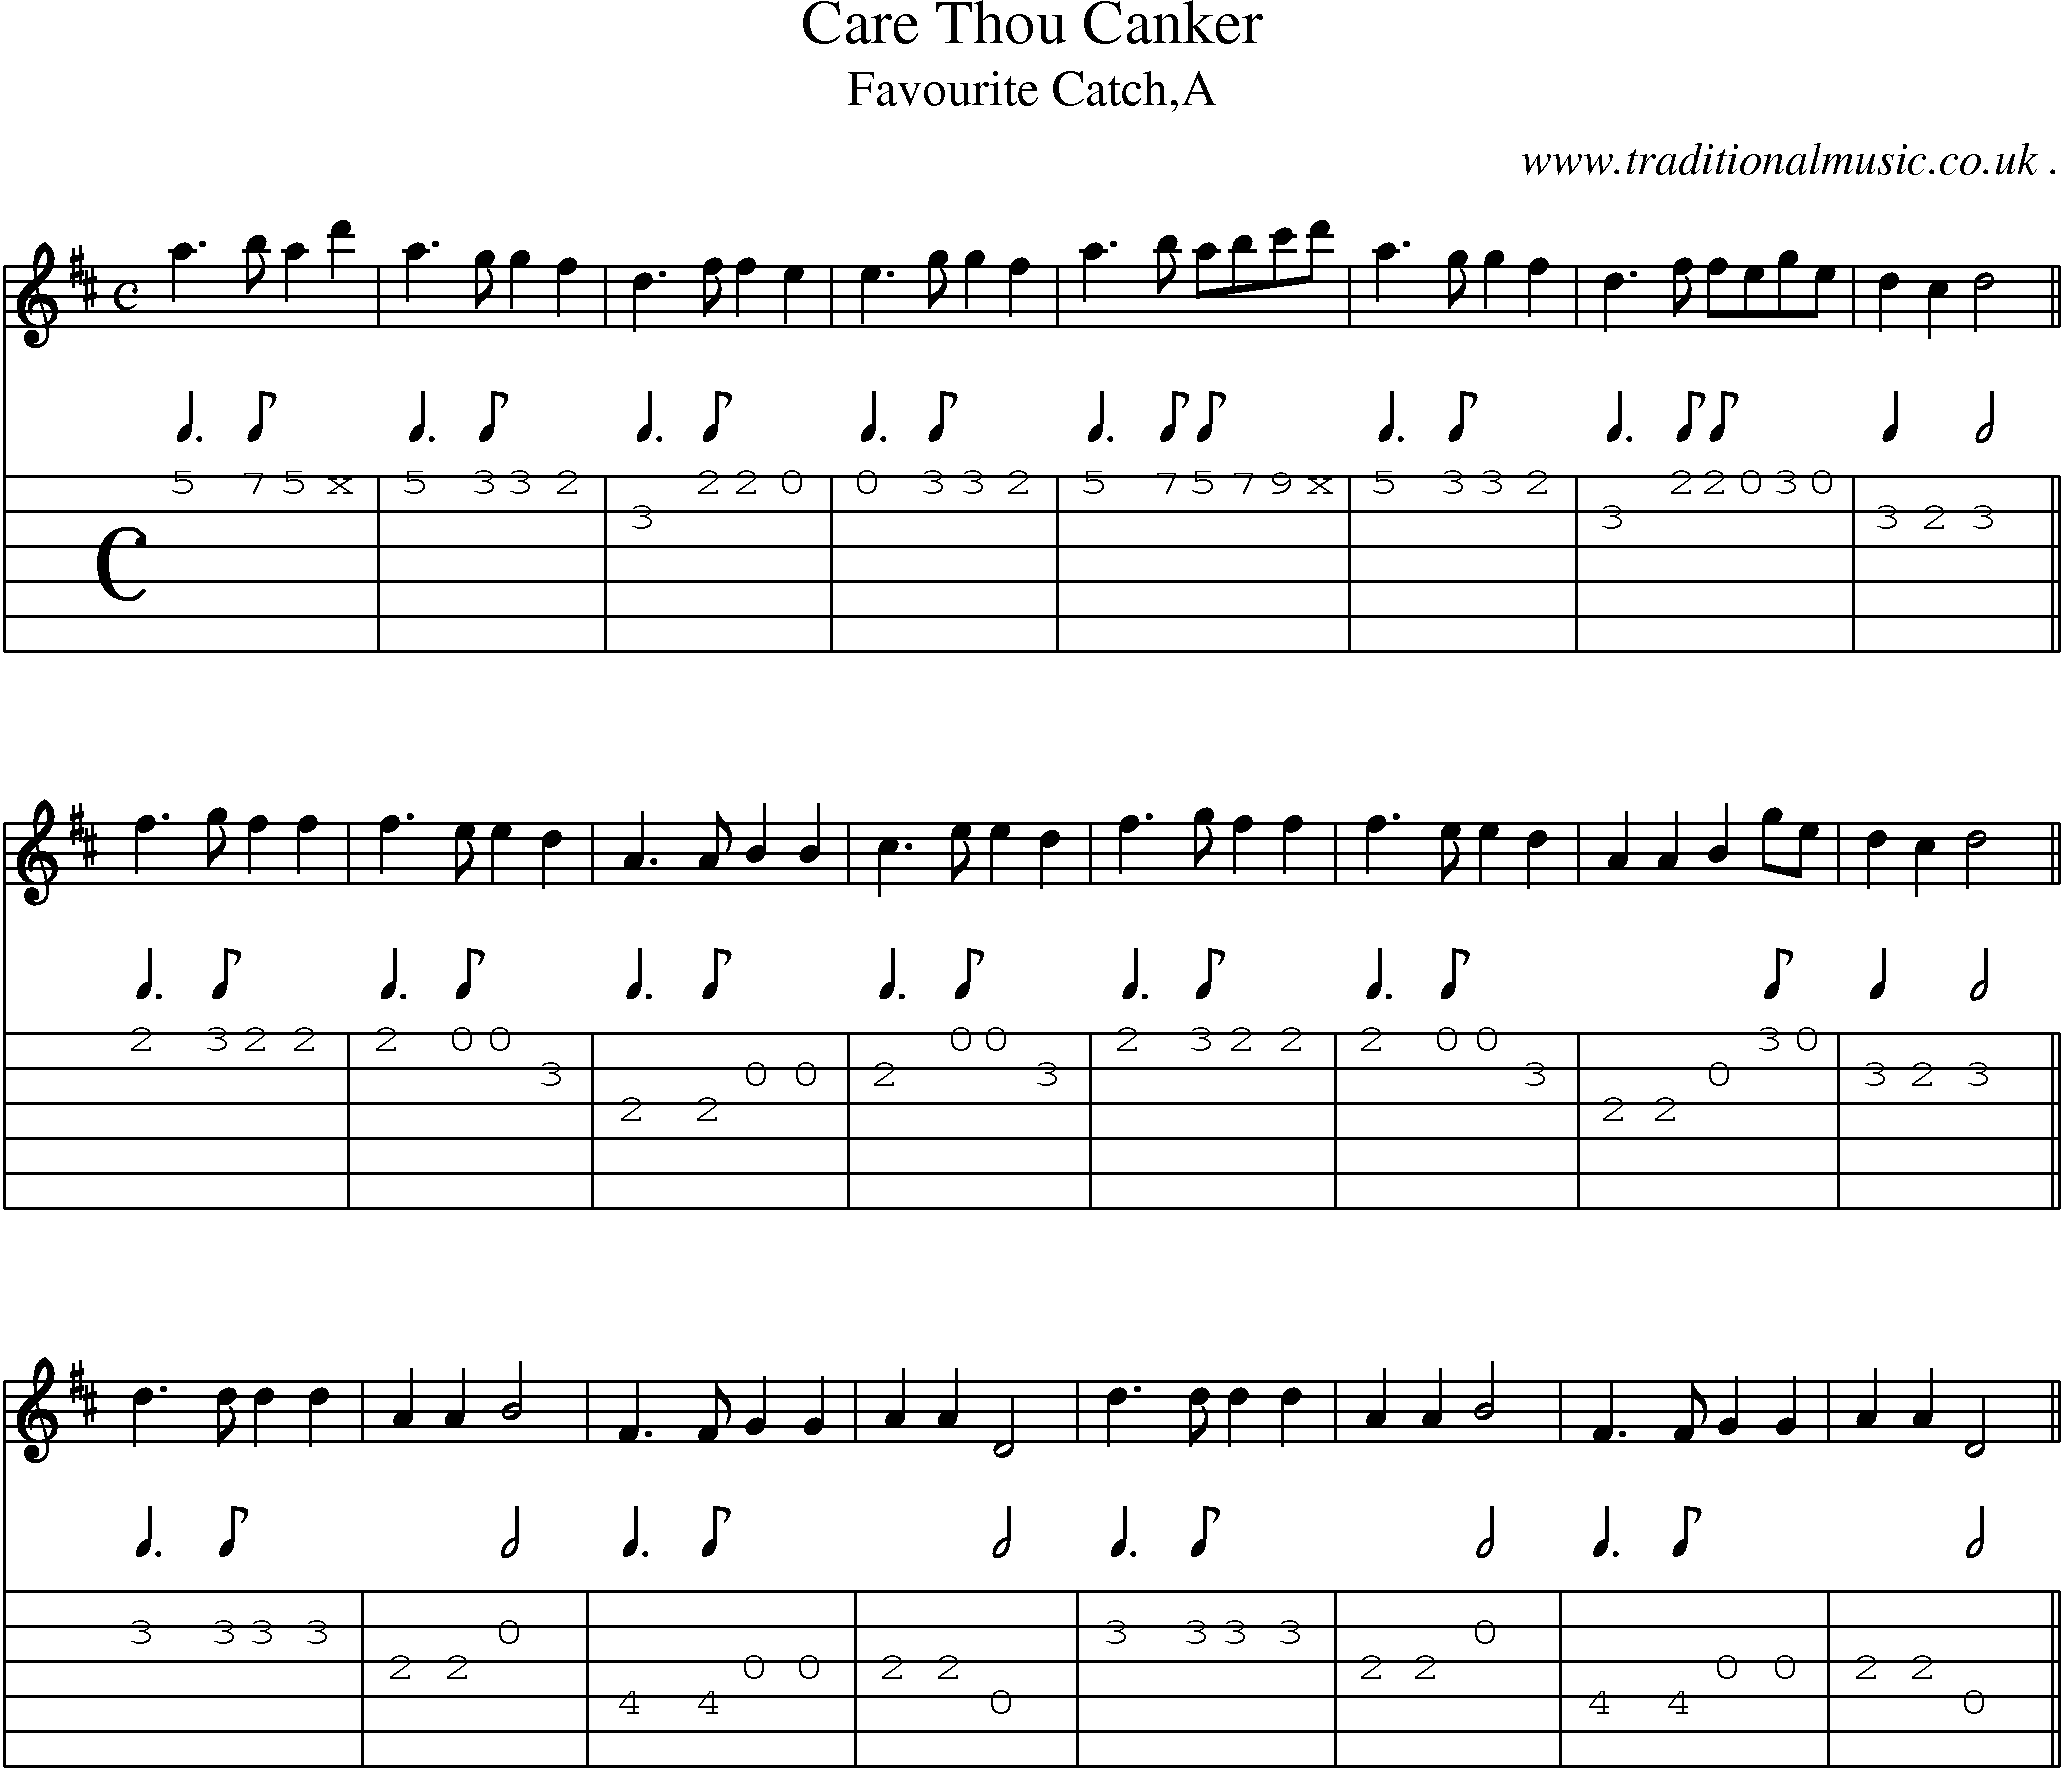 Sheet-Music and Guitar Tabs for Care Thou Canker